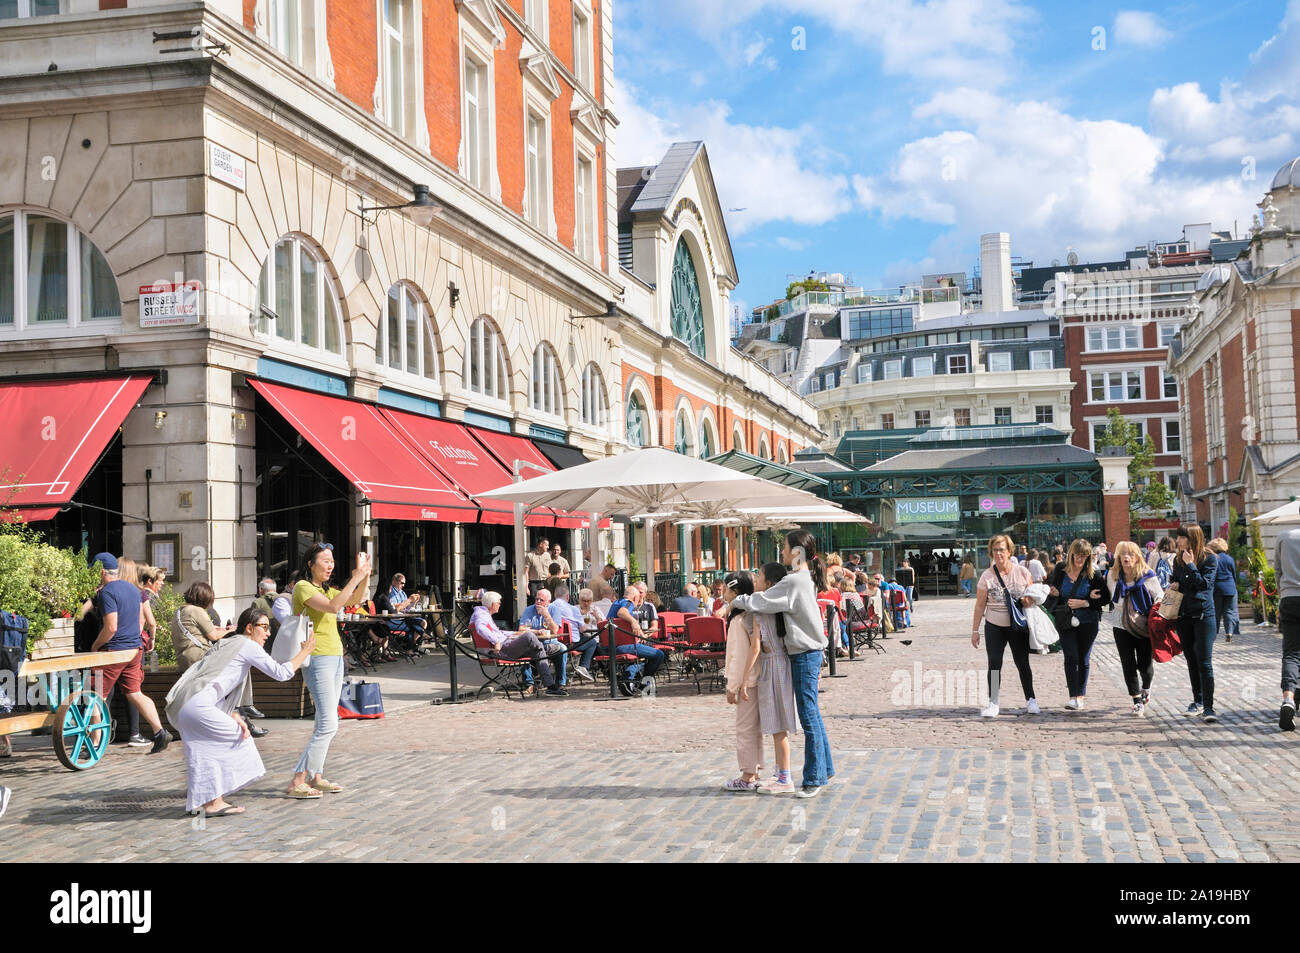 Tourists enjoying the summer weather at Covent Garden Piazza in London's West End, London, England, UK Stock Photo